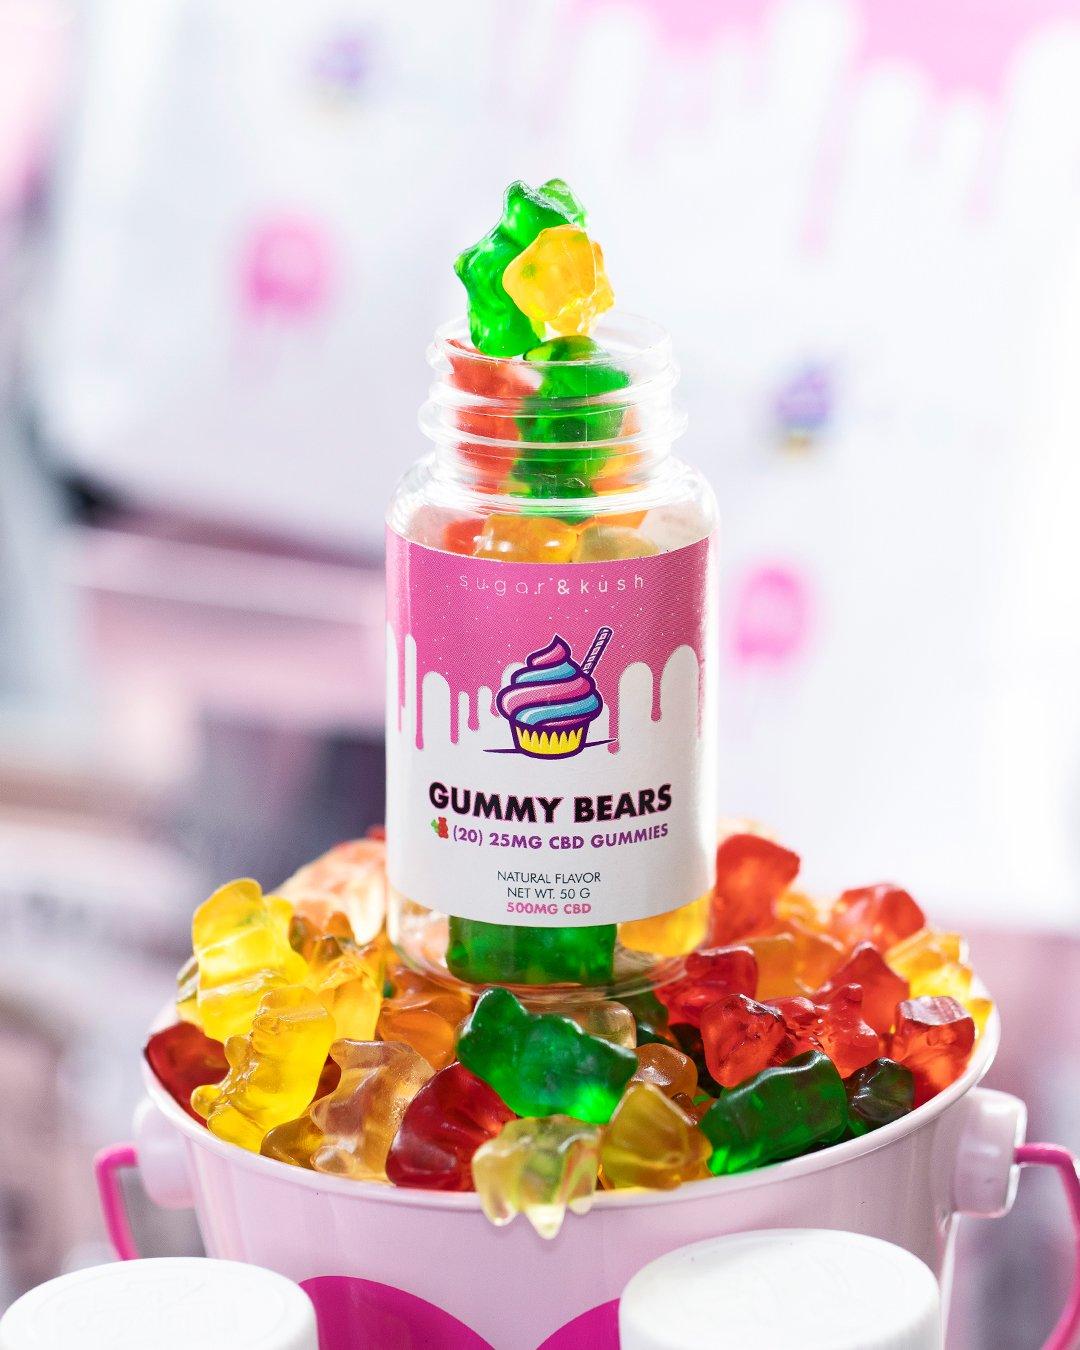 Colorful gummy bears infused with CBD from Sugar and Kush.